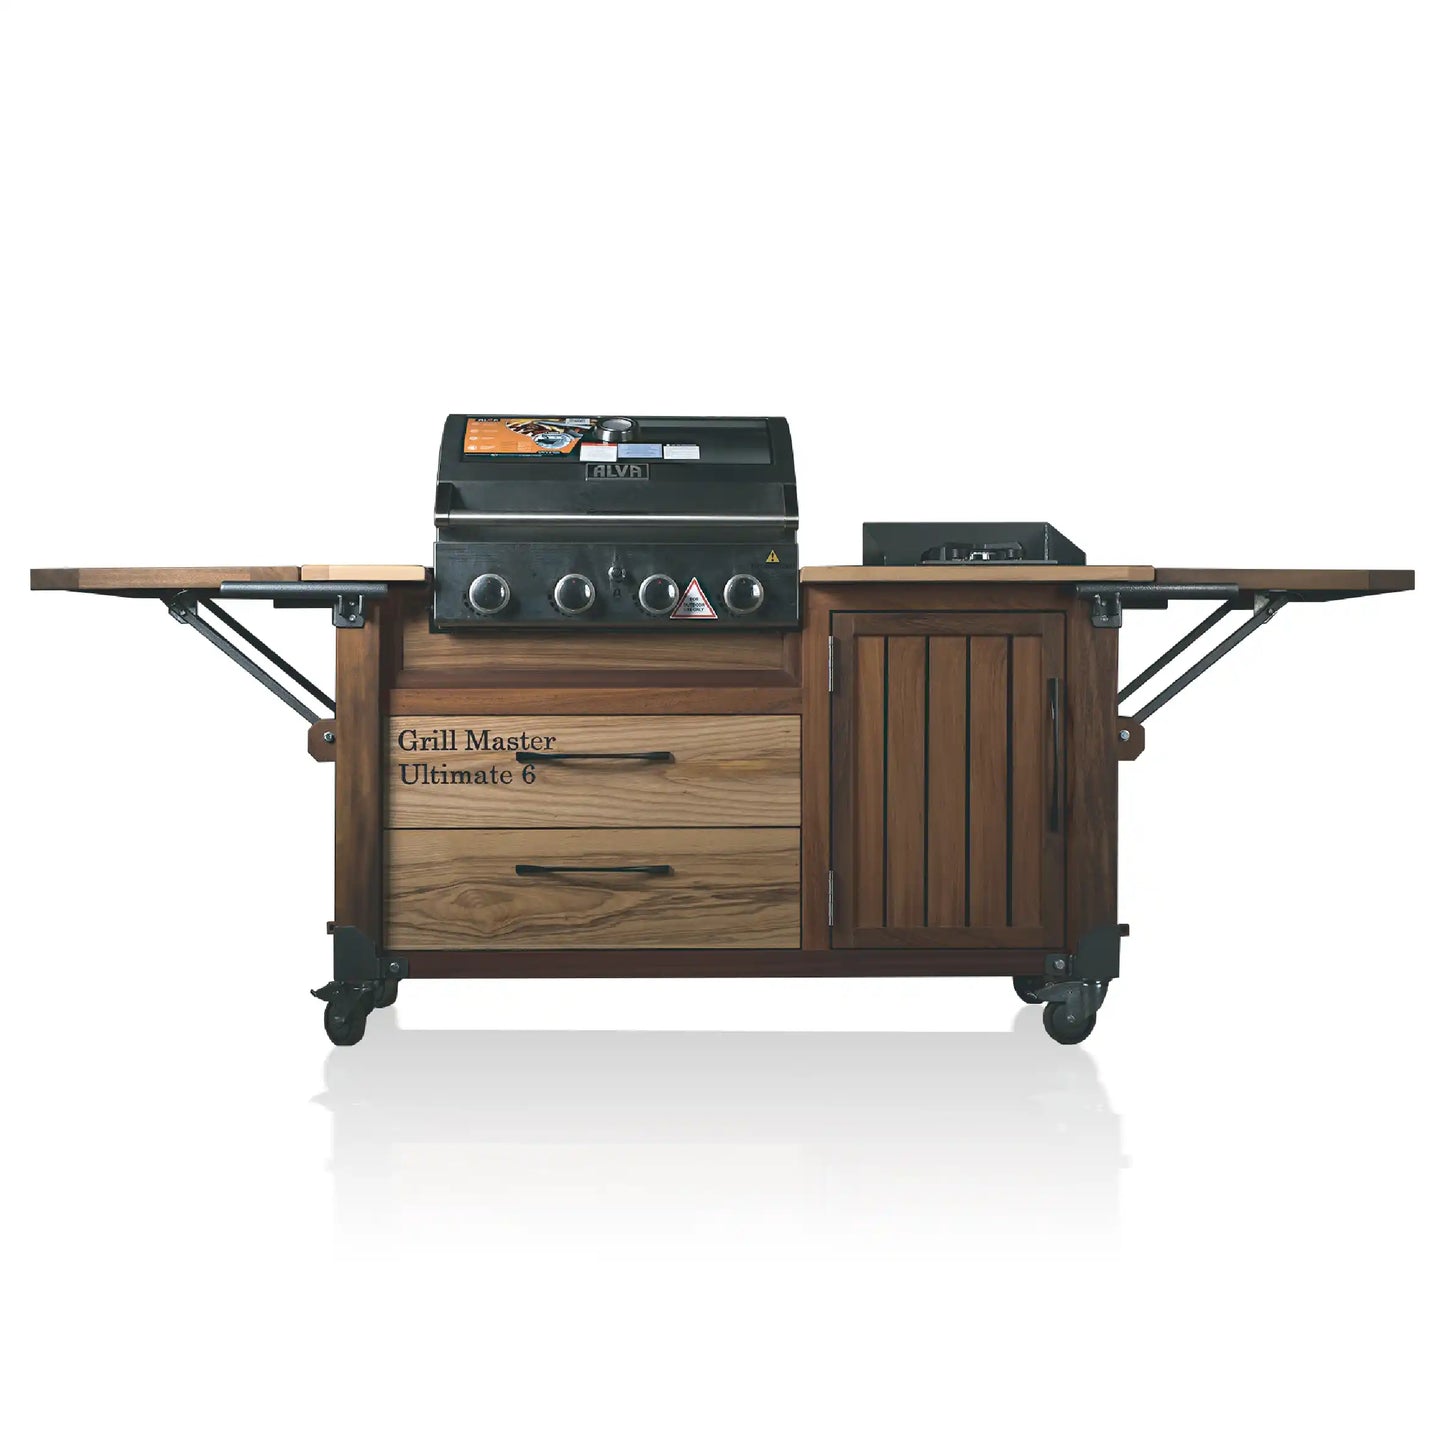 Ultimate Grill Master 6 - Braaiers.co.za